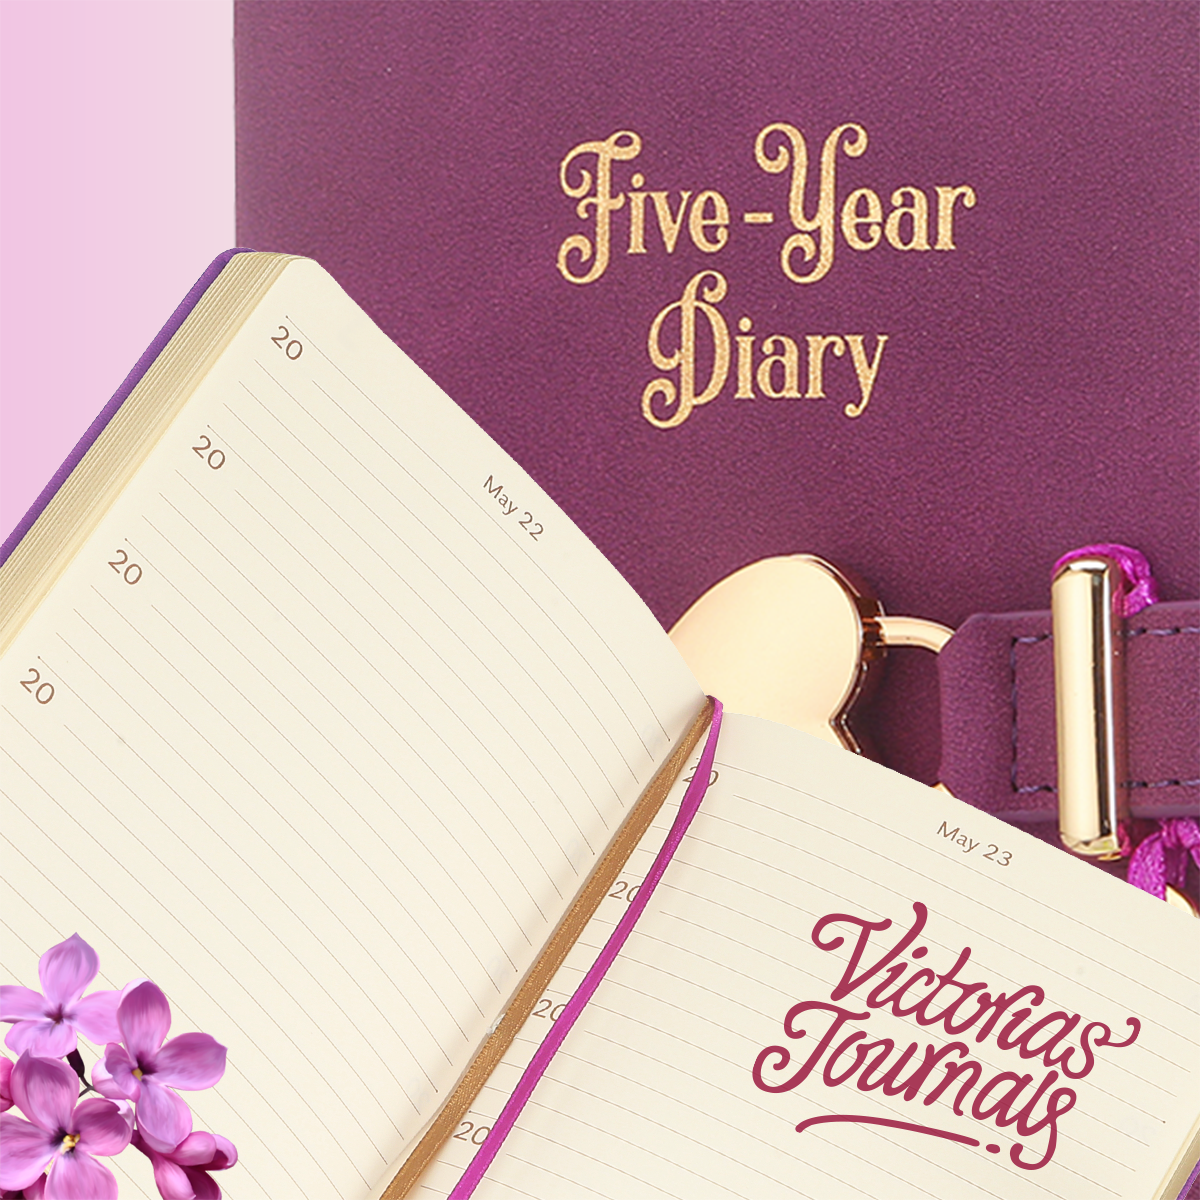 5 Year Diary for Women and Girls: Five-Year Happiness, Memory and Daily Journal with Heart Lock - 4.7x6.5", 394pages (Mauve)